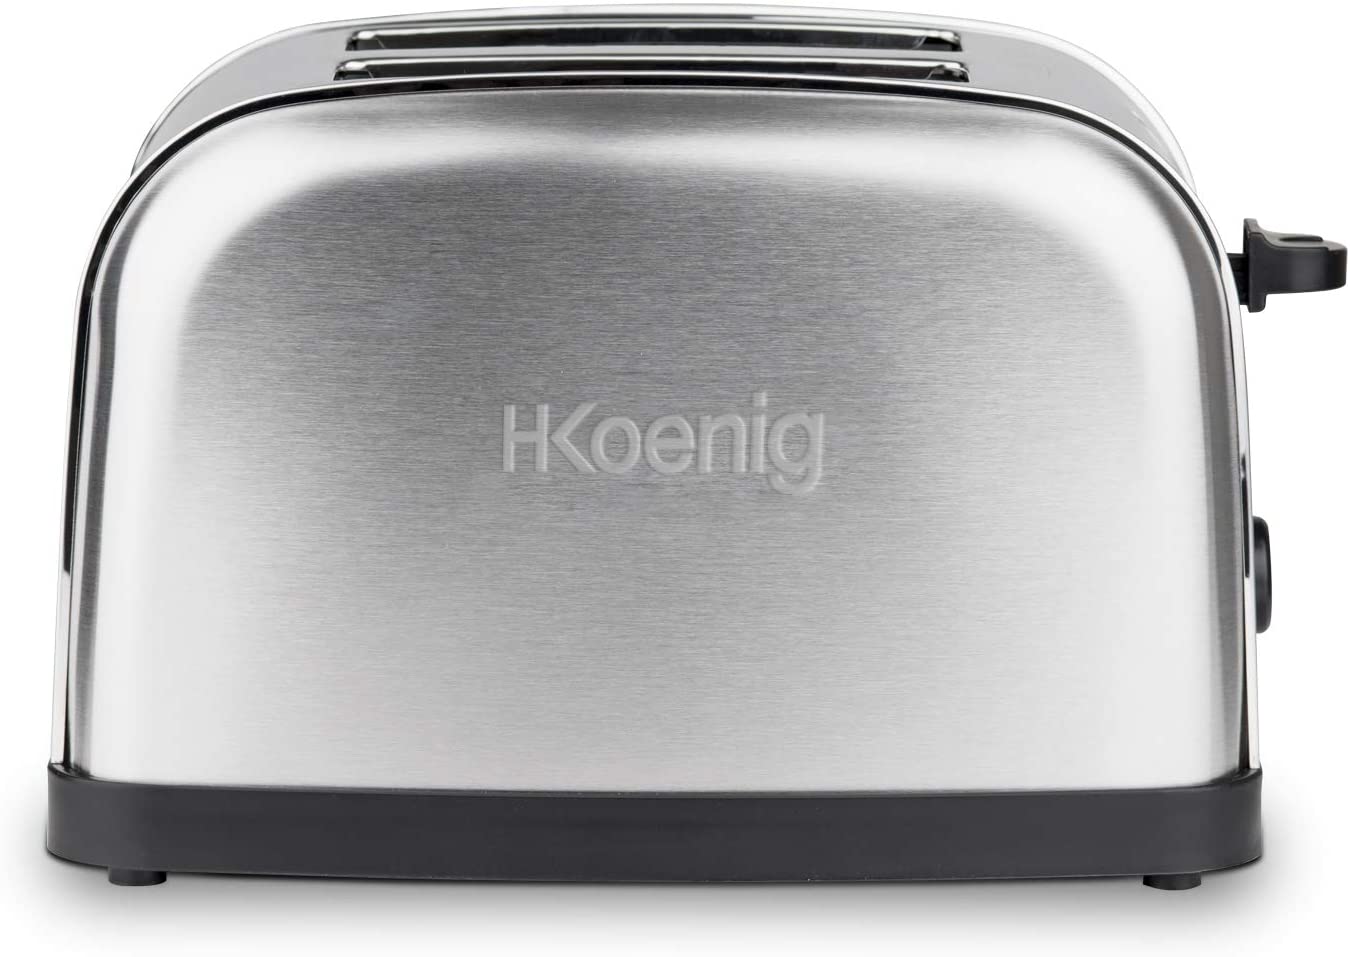 H.Koenig TOS7 Toaster / 2 Slices / 6 Browning Levels / 850 W / Stainless Steel / Silver